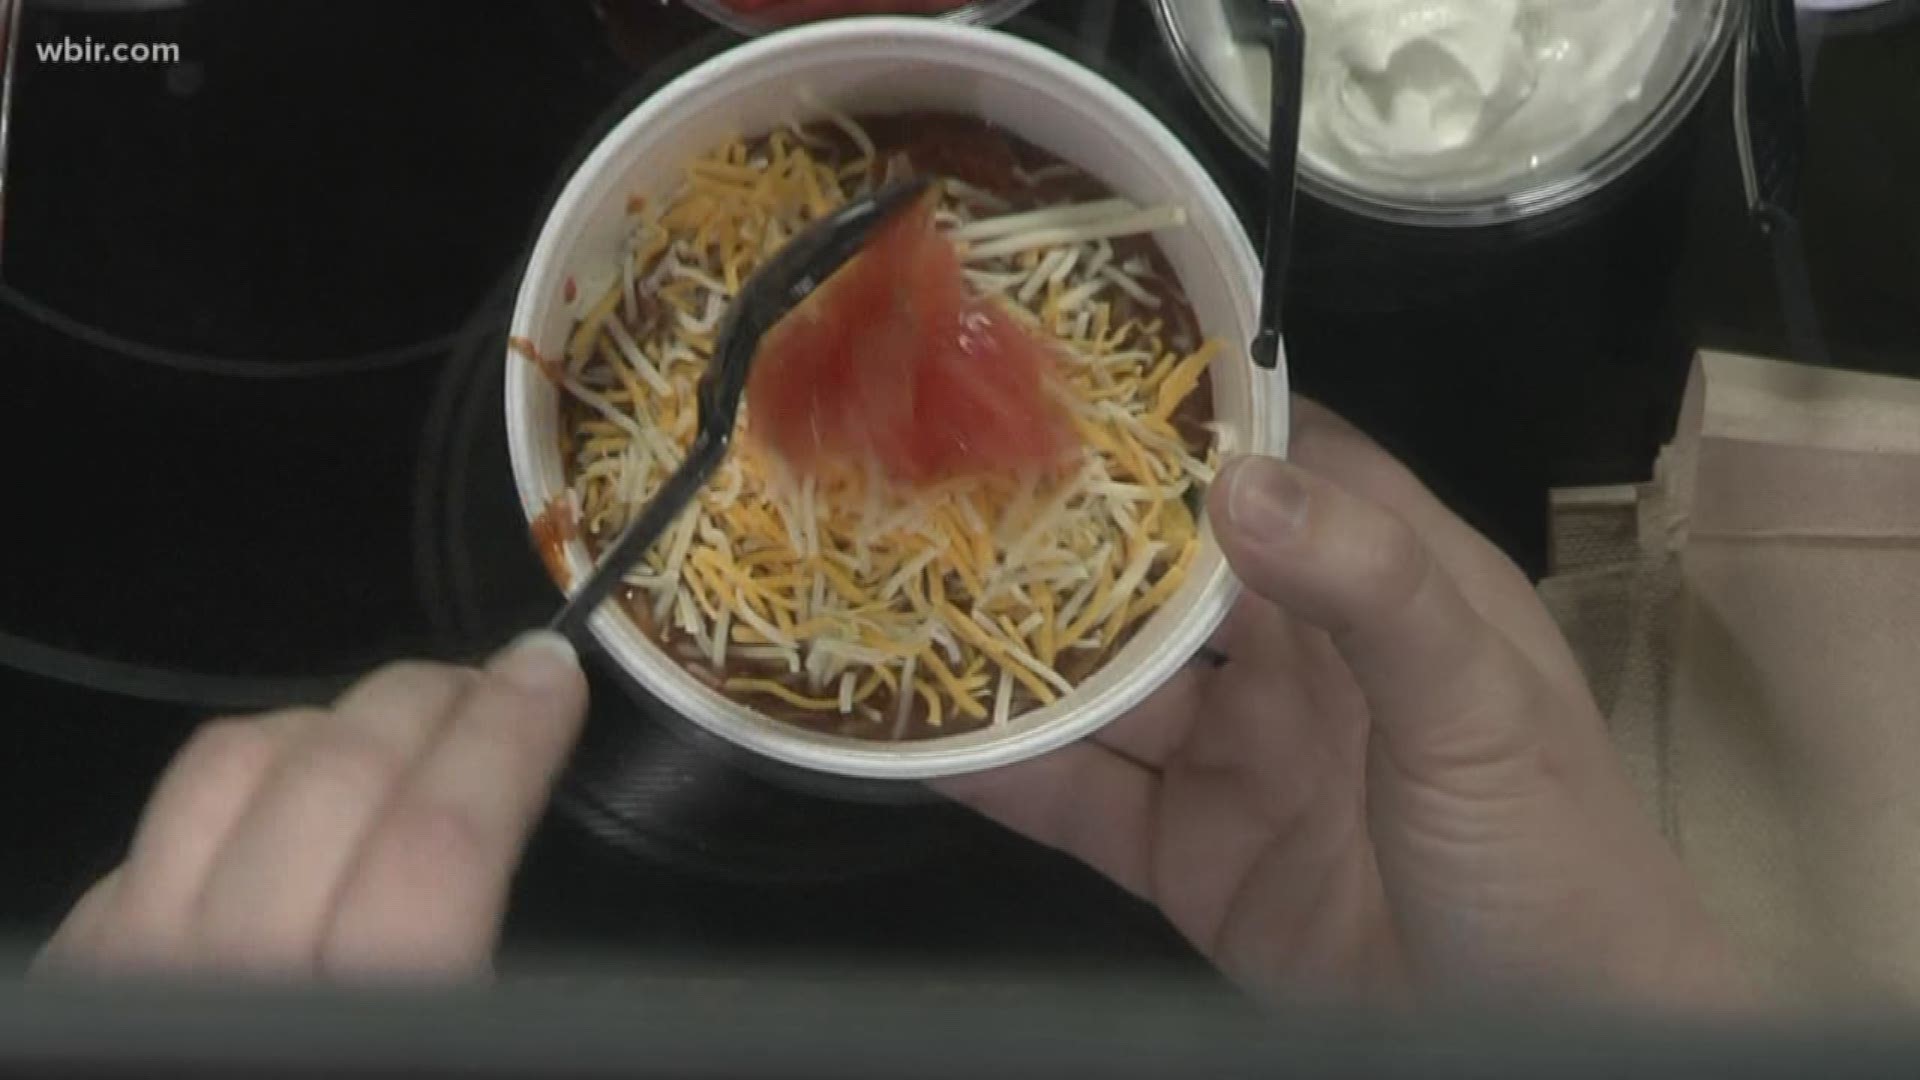 On today's In the Kitchen, we make Petro's to celebrate a new Petro's store opening downtown.